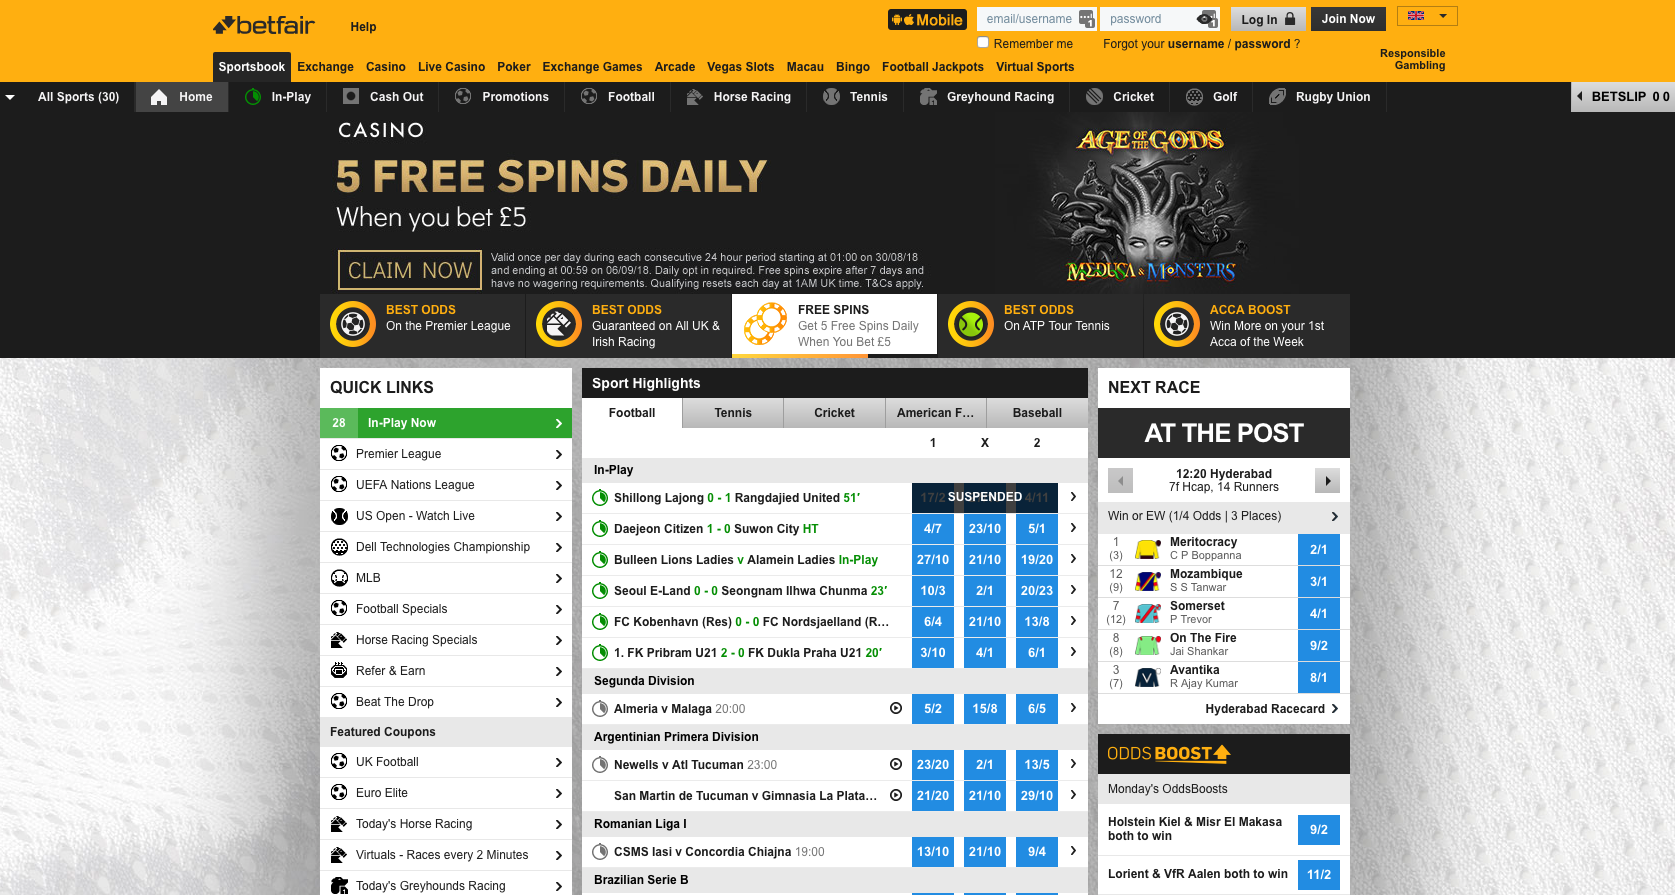 sportingbet 200 free spins